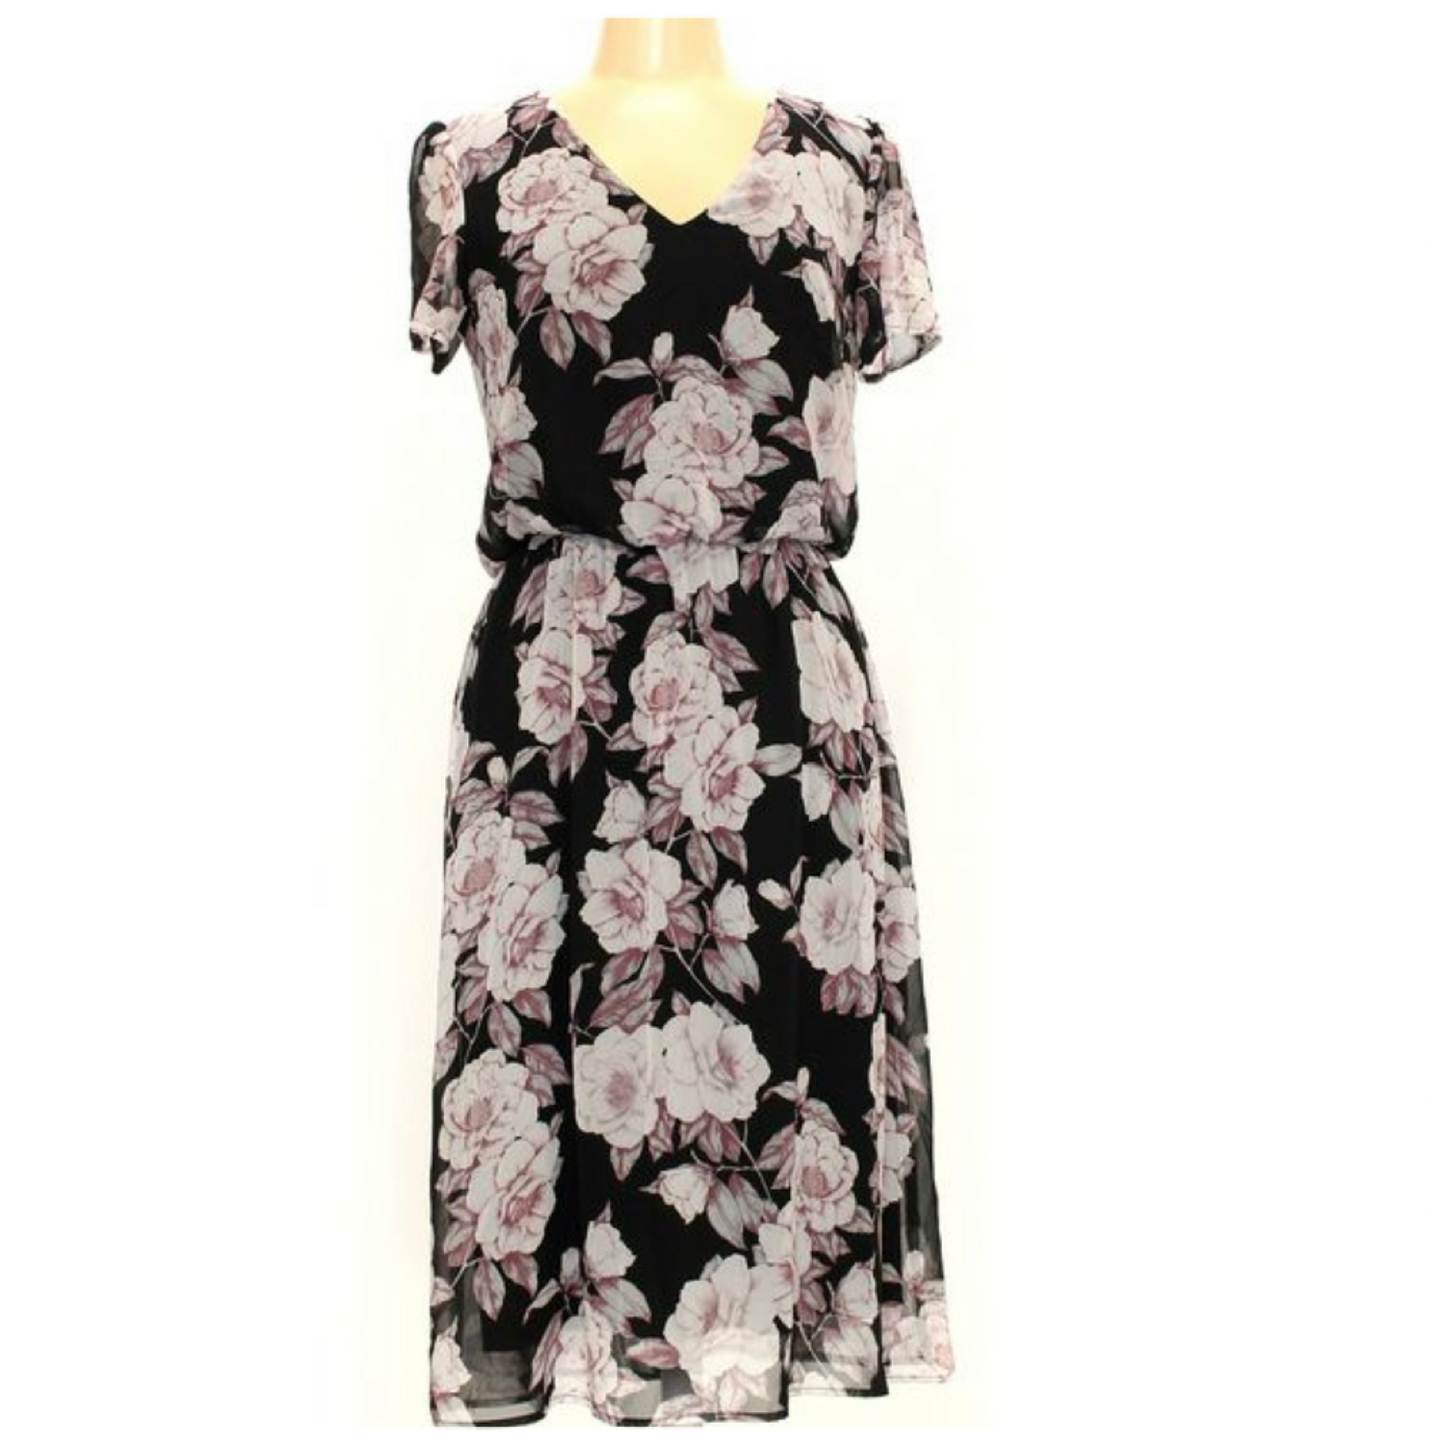 Connected Apparel Floral Dress, US Size 8